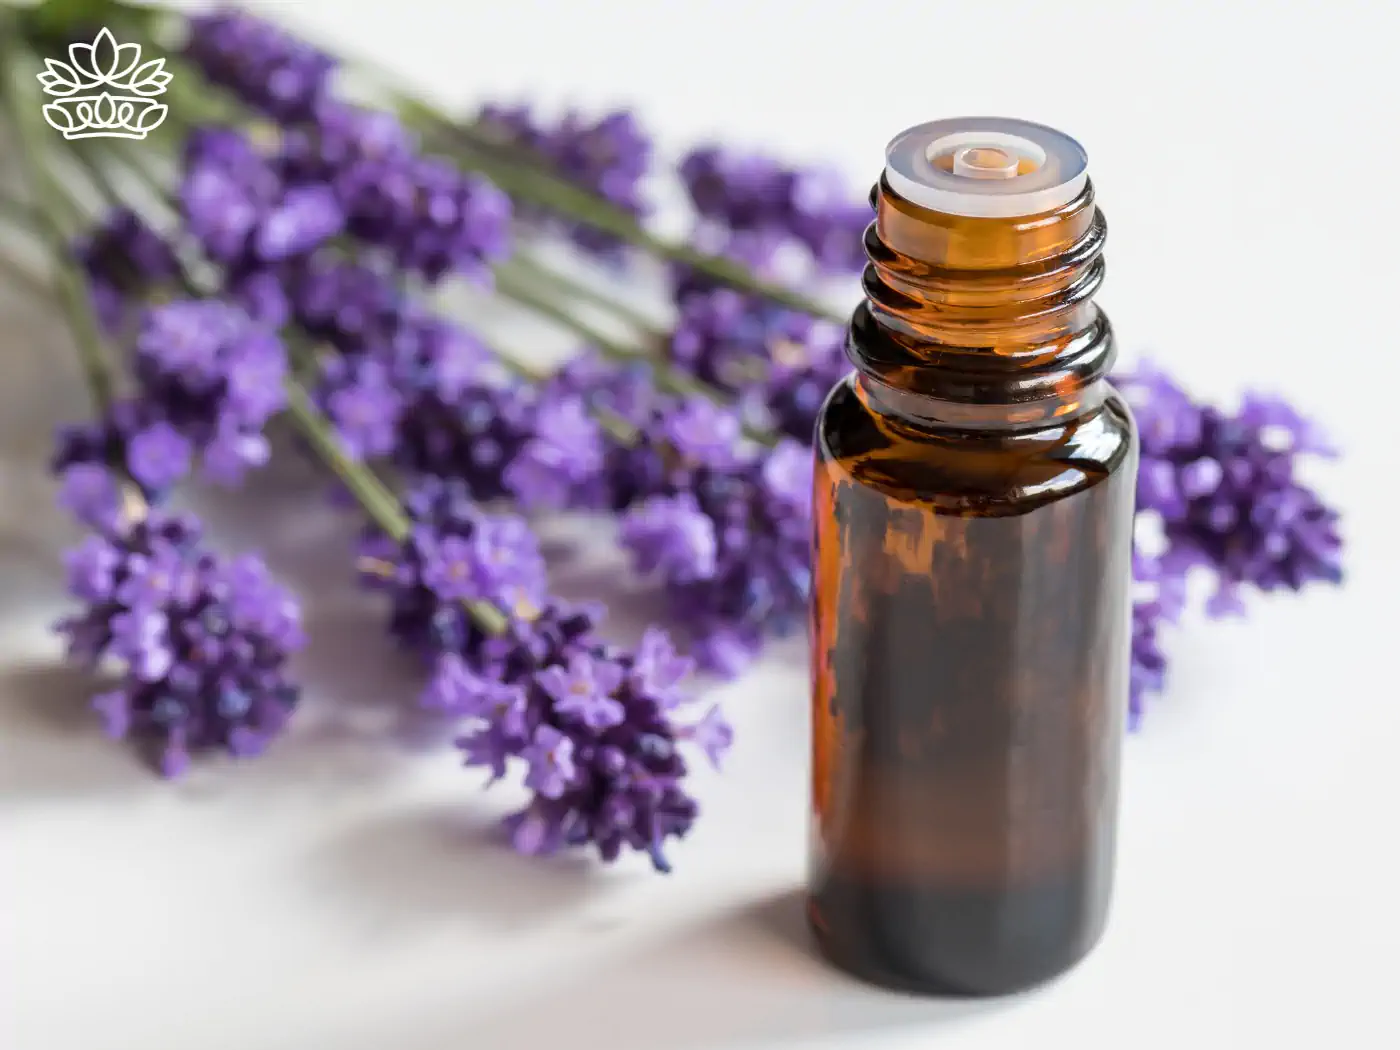 Amber essential oil bottle with fresh lavender flowers. Collection: Essential Oils, Fabulous Flowers & Gifts.